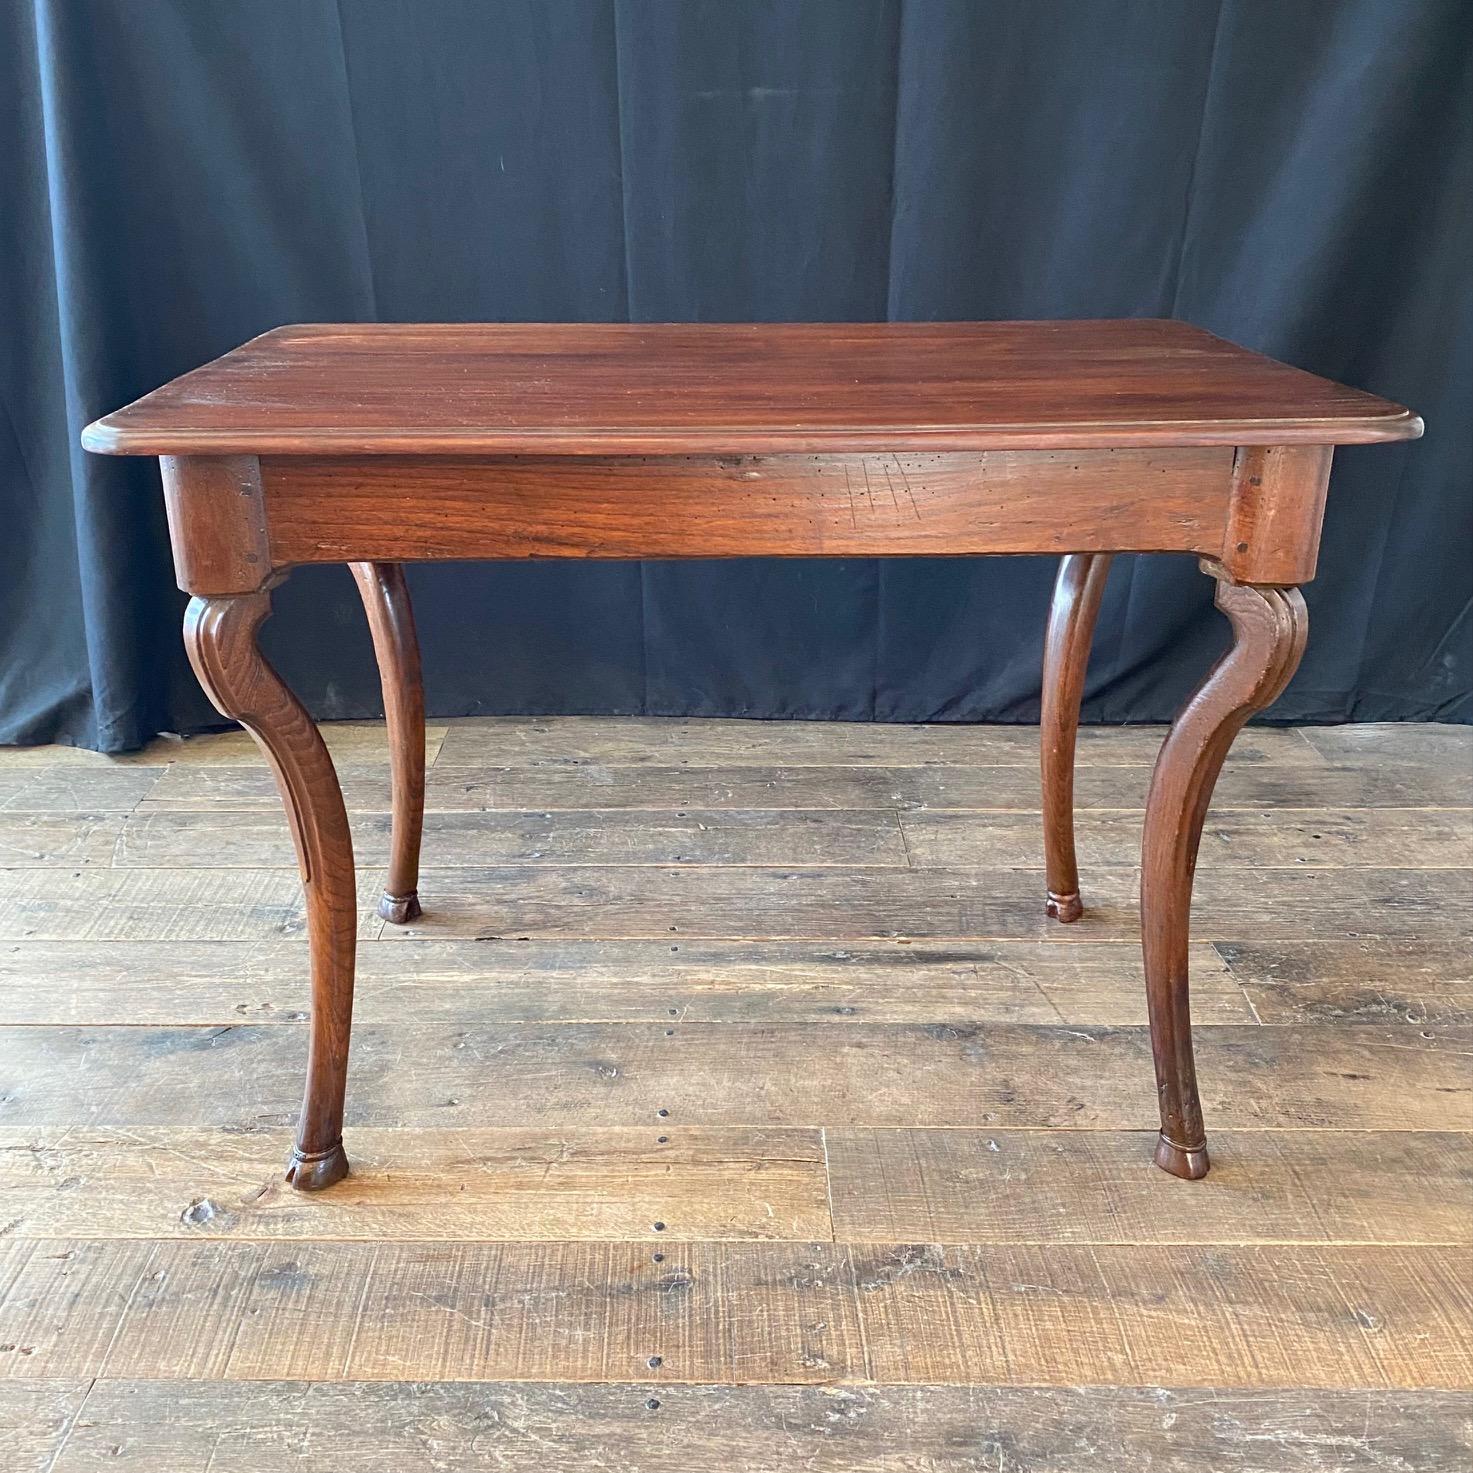 Country French walnut desk or side table with hoof feet and one wide front drawer. This smaller scale desk can be used in a variety of settings, or as a side table. Drawer shows evidence of its age; there is ink from an inkwell that has spilled